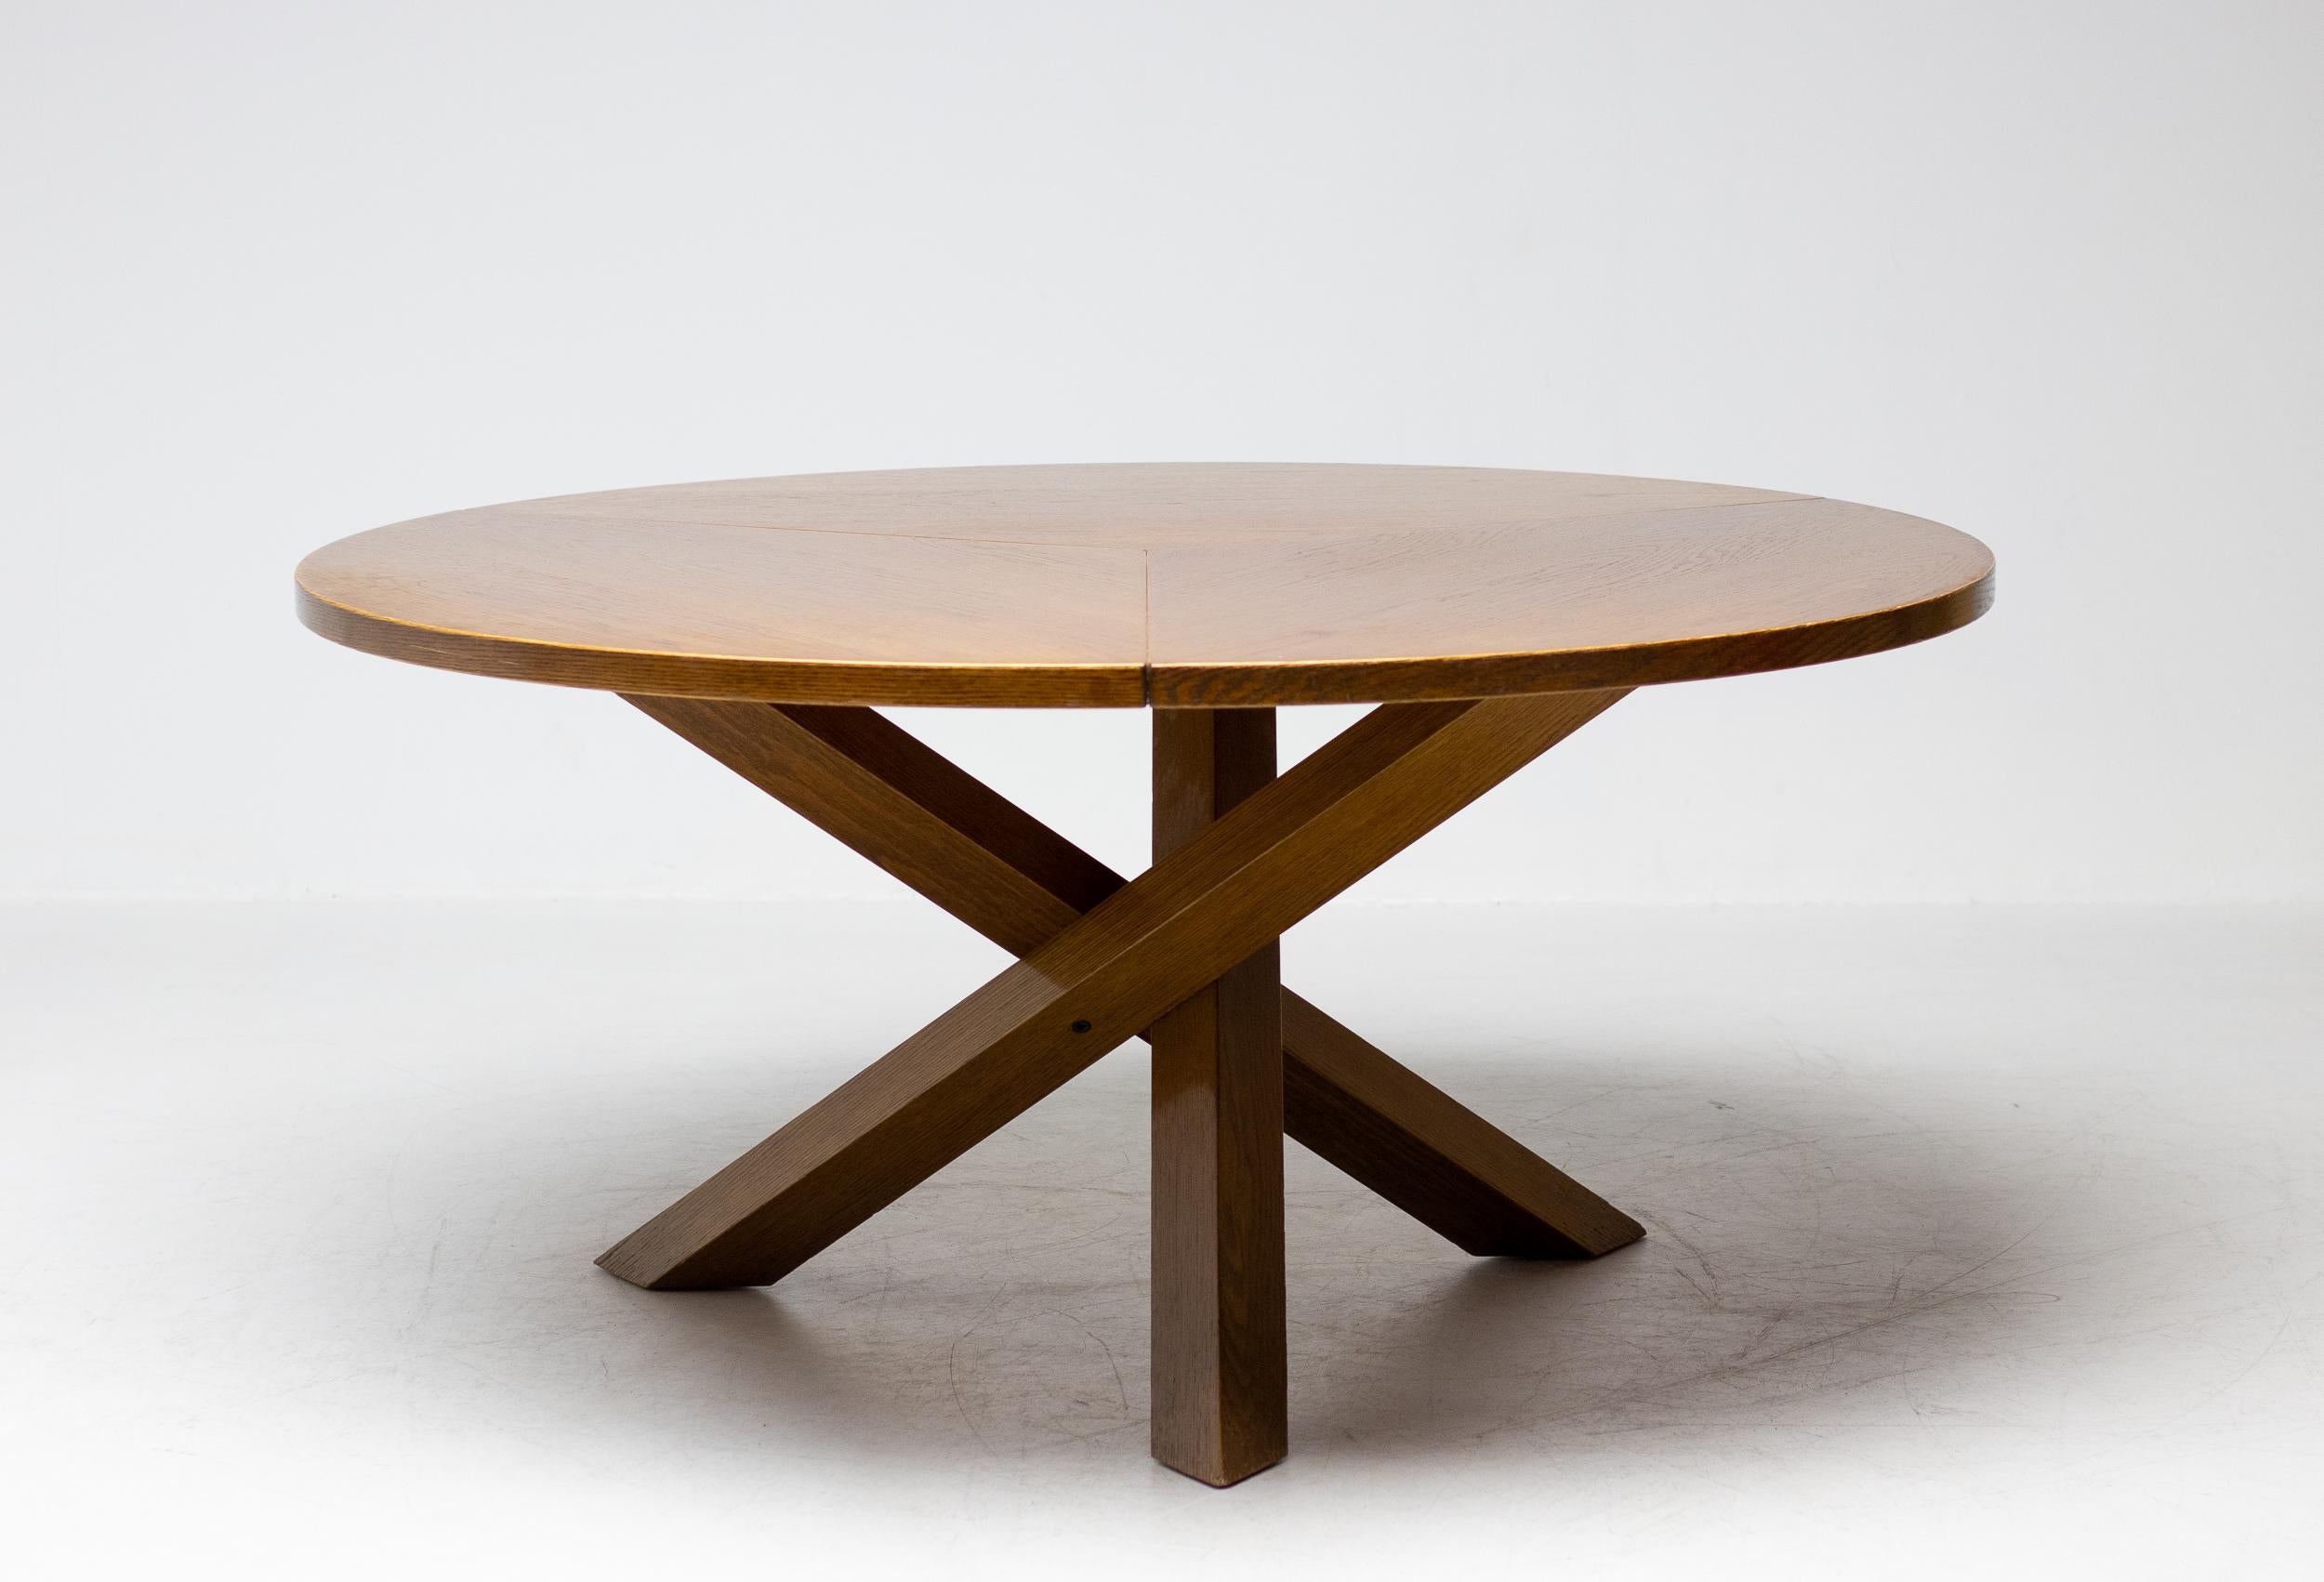 Dark stained oak dining table by Martin Visser for 't Spectrum, the Netherlands.
The oak top consists of three attached segments, and rests on a base of crossed solid oak beams.
This spectacular Martin Visser table was designed at the same time as